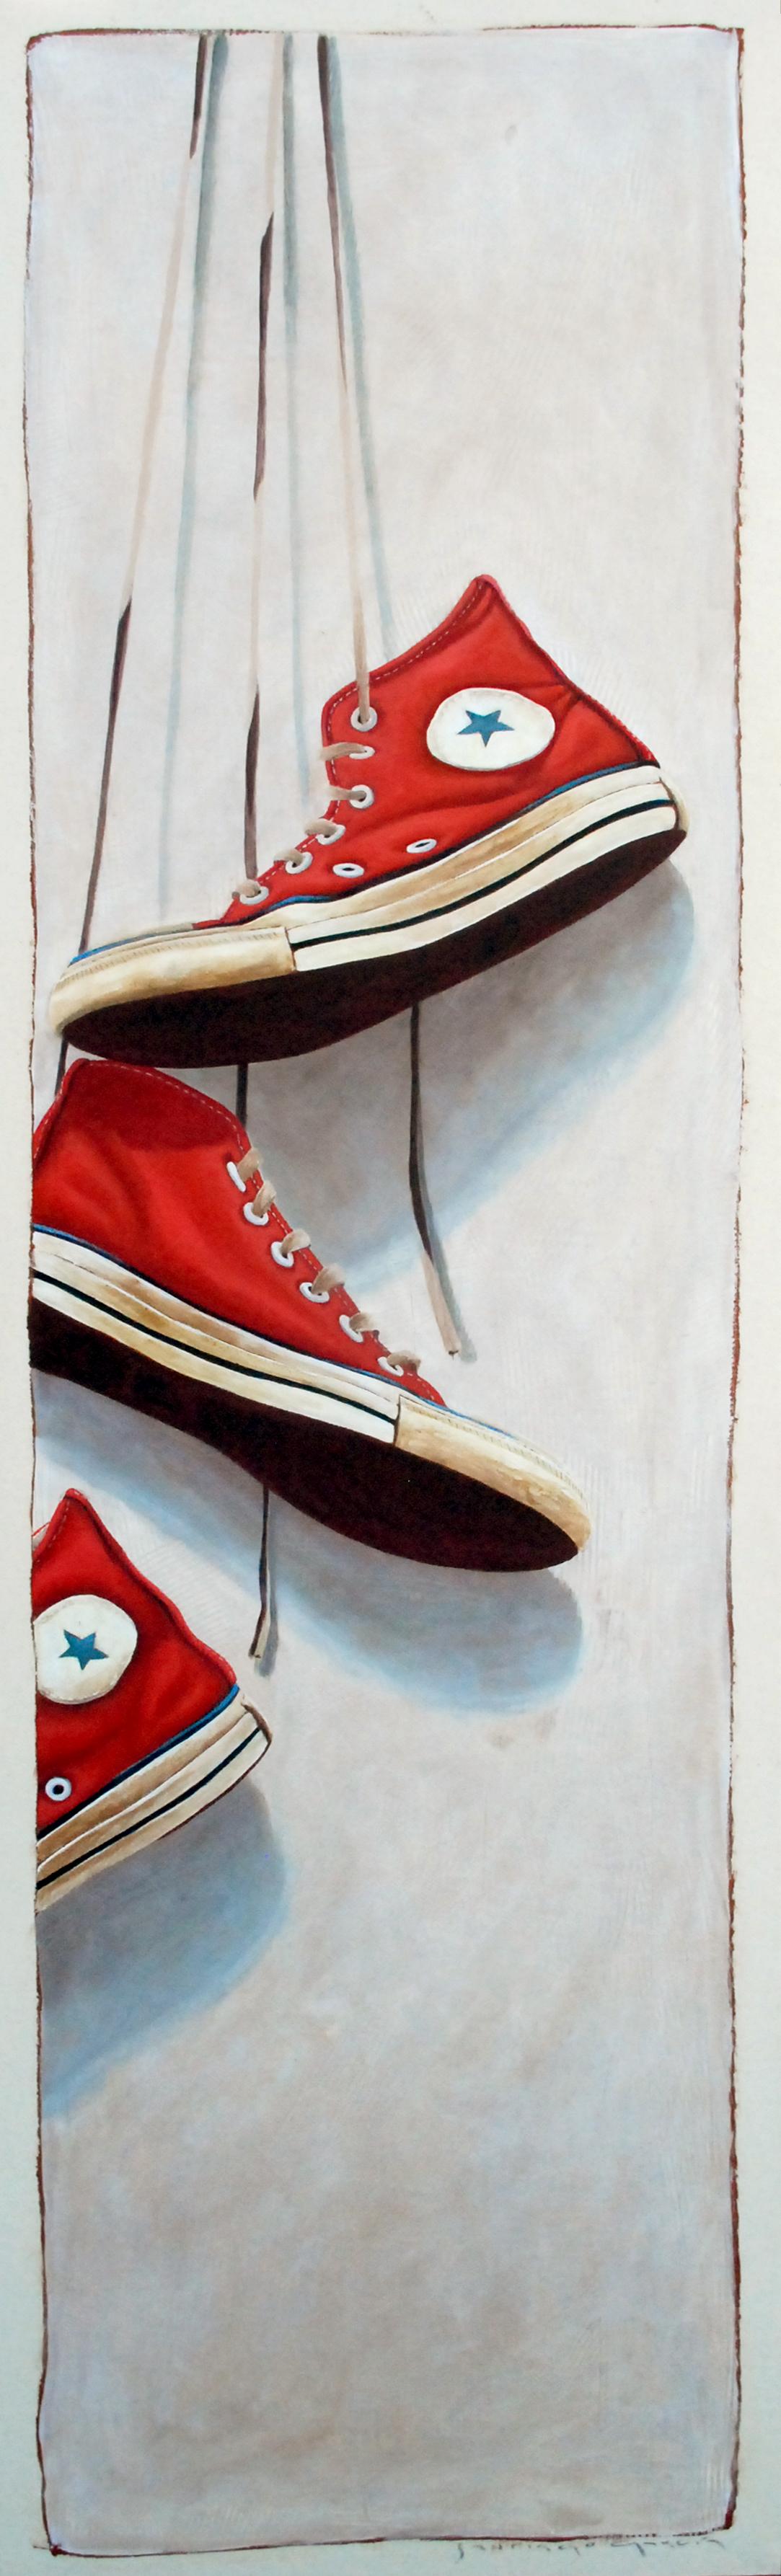 red converse high top sneakers hanging 